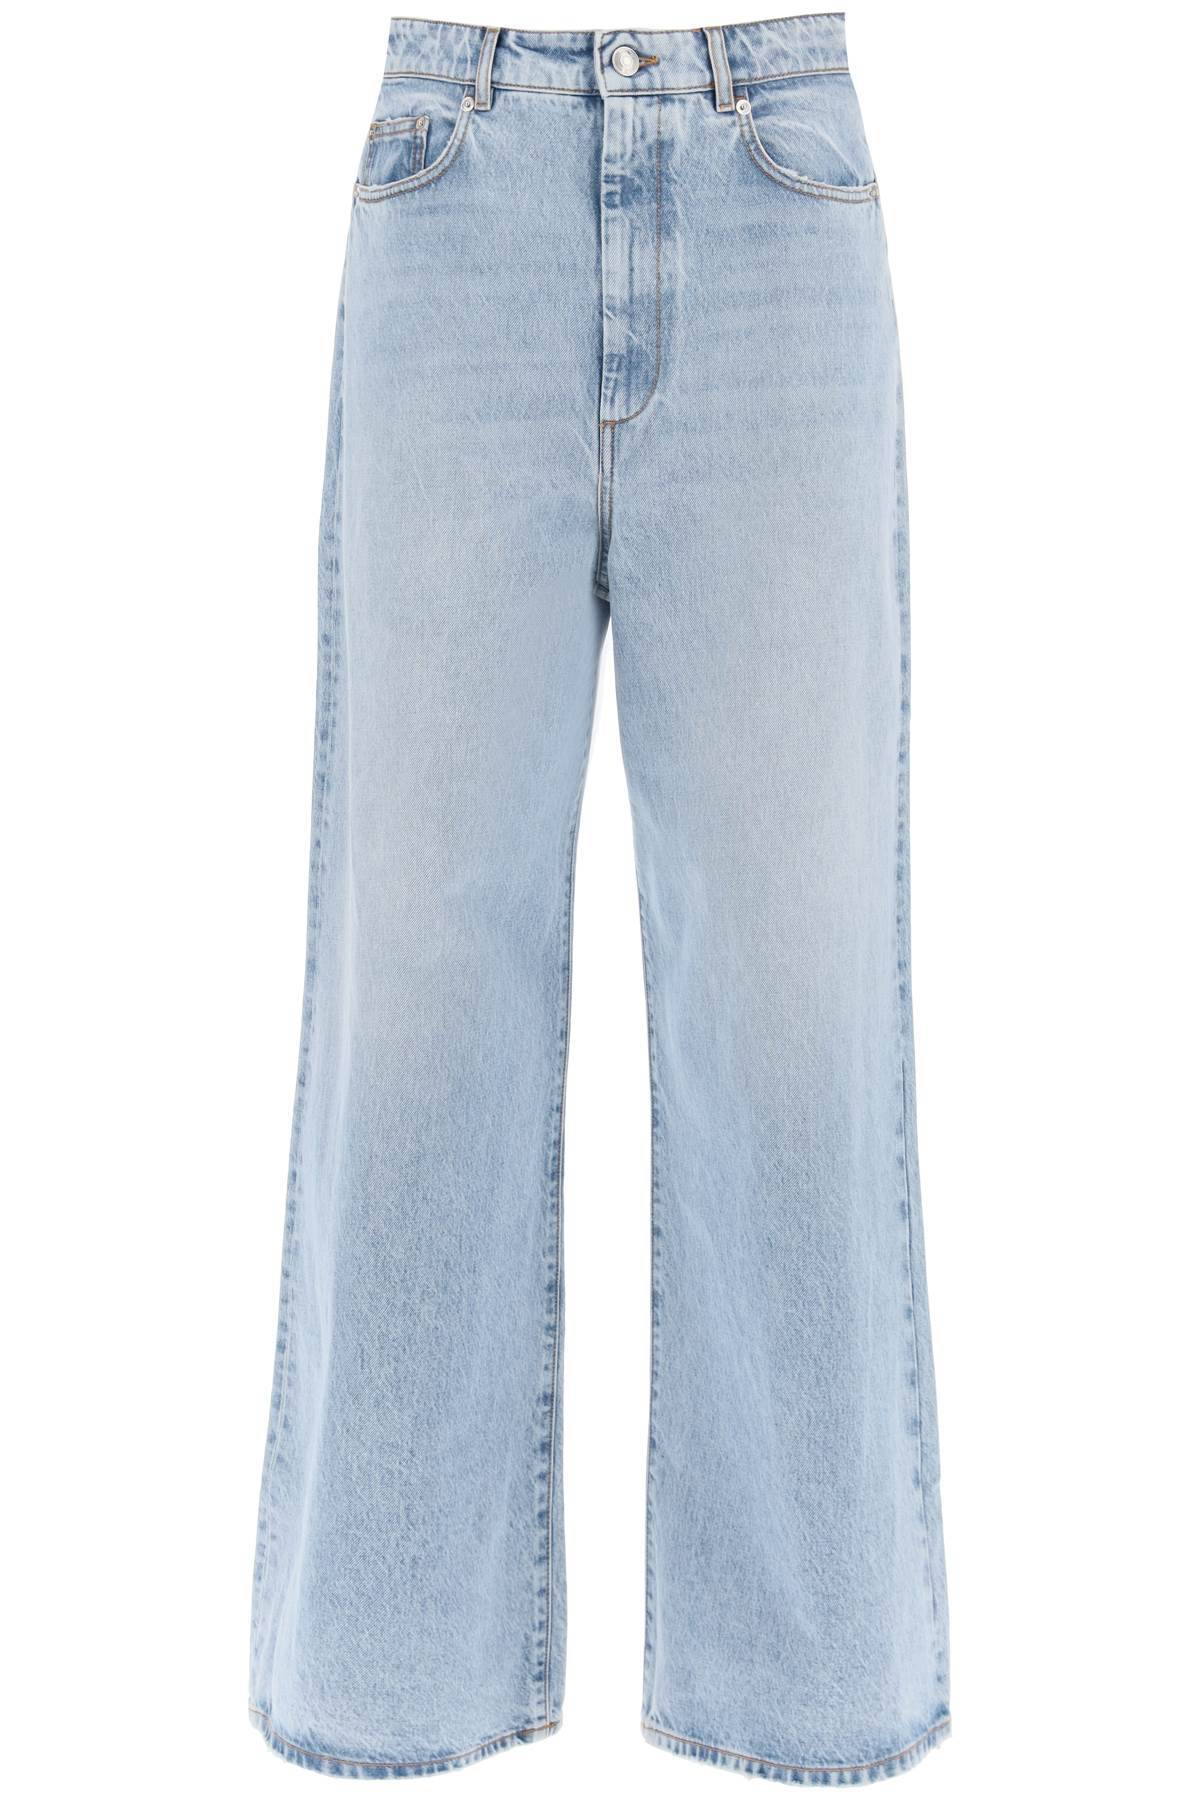 Sportmax SPORTMAX wide-legged angri jeans for a